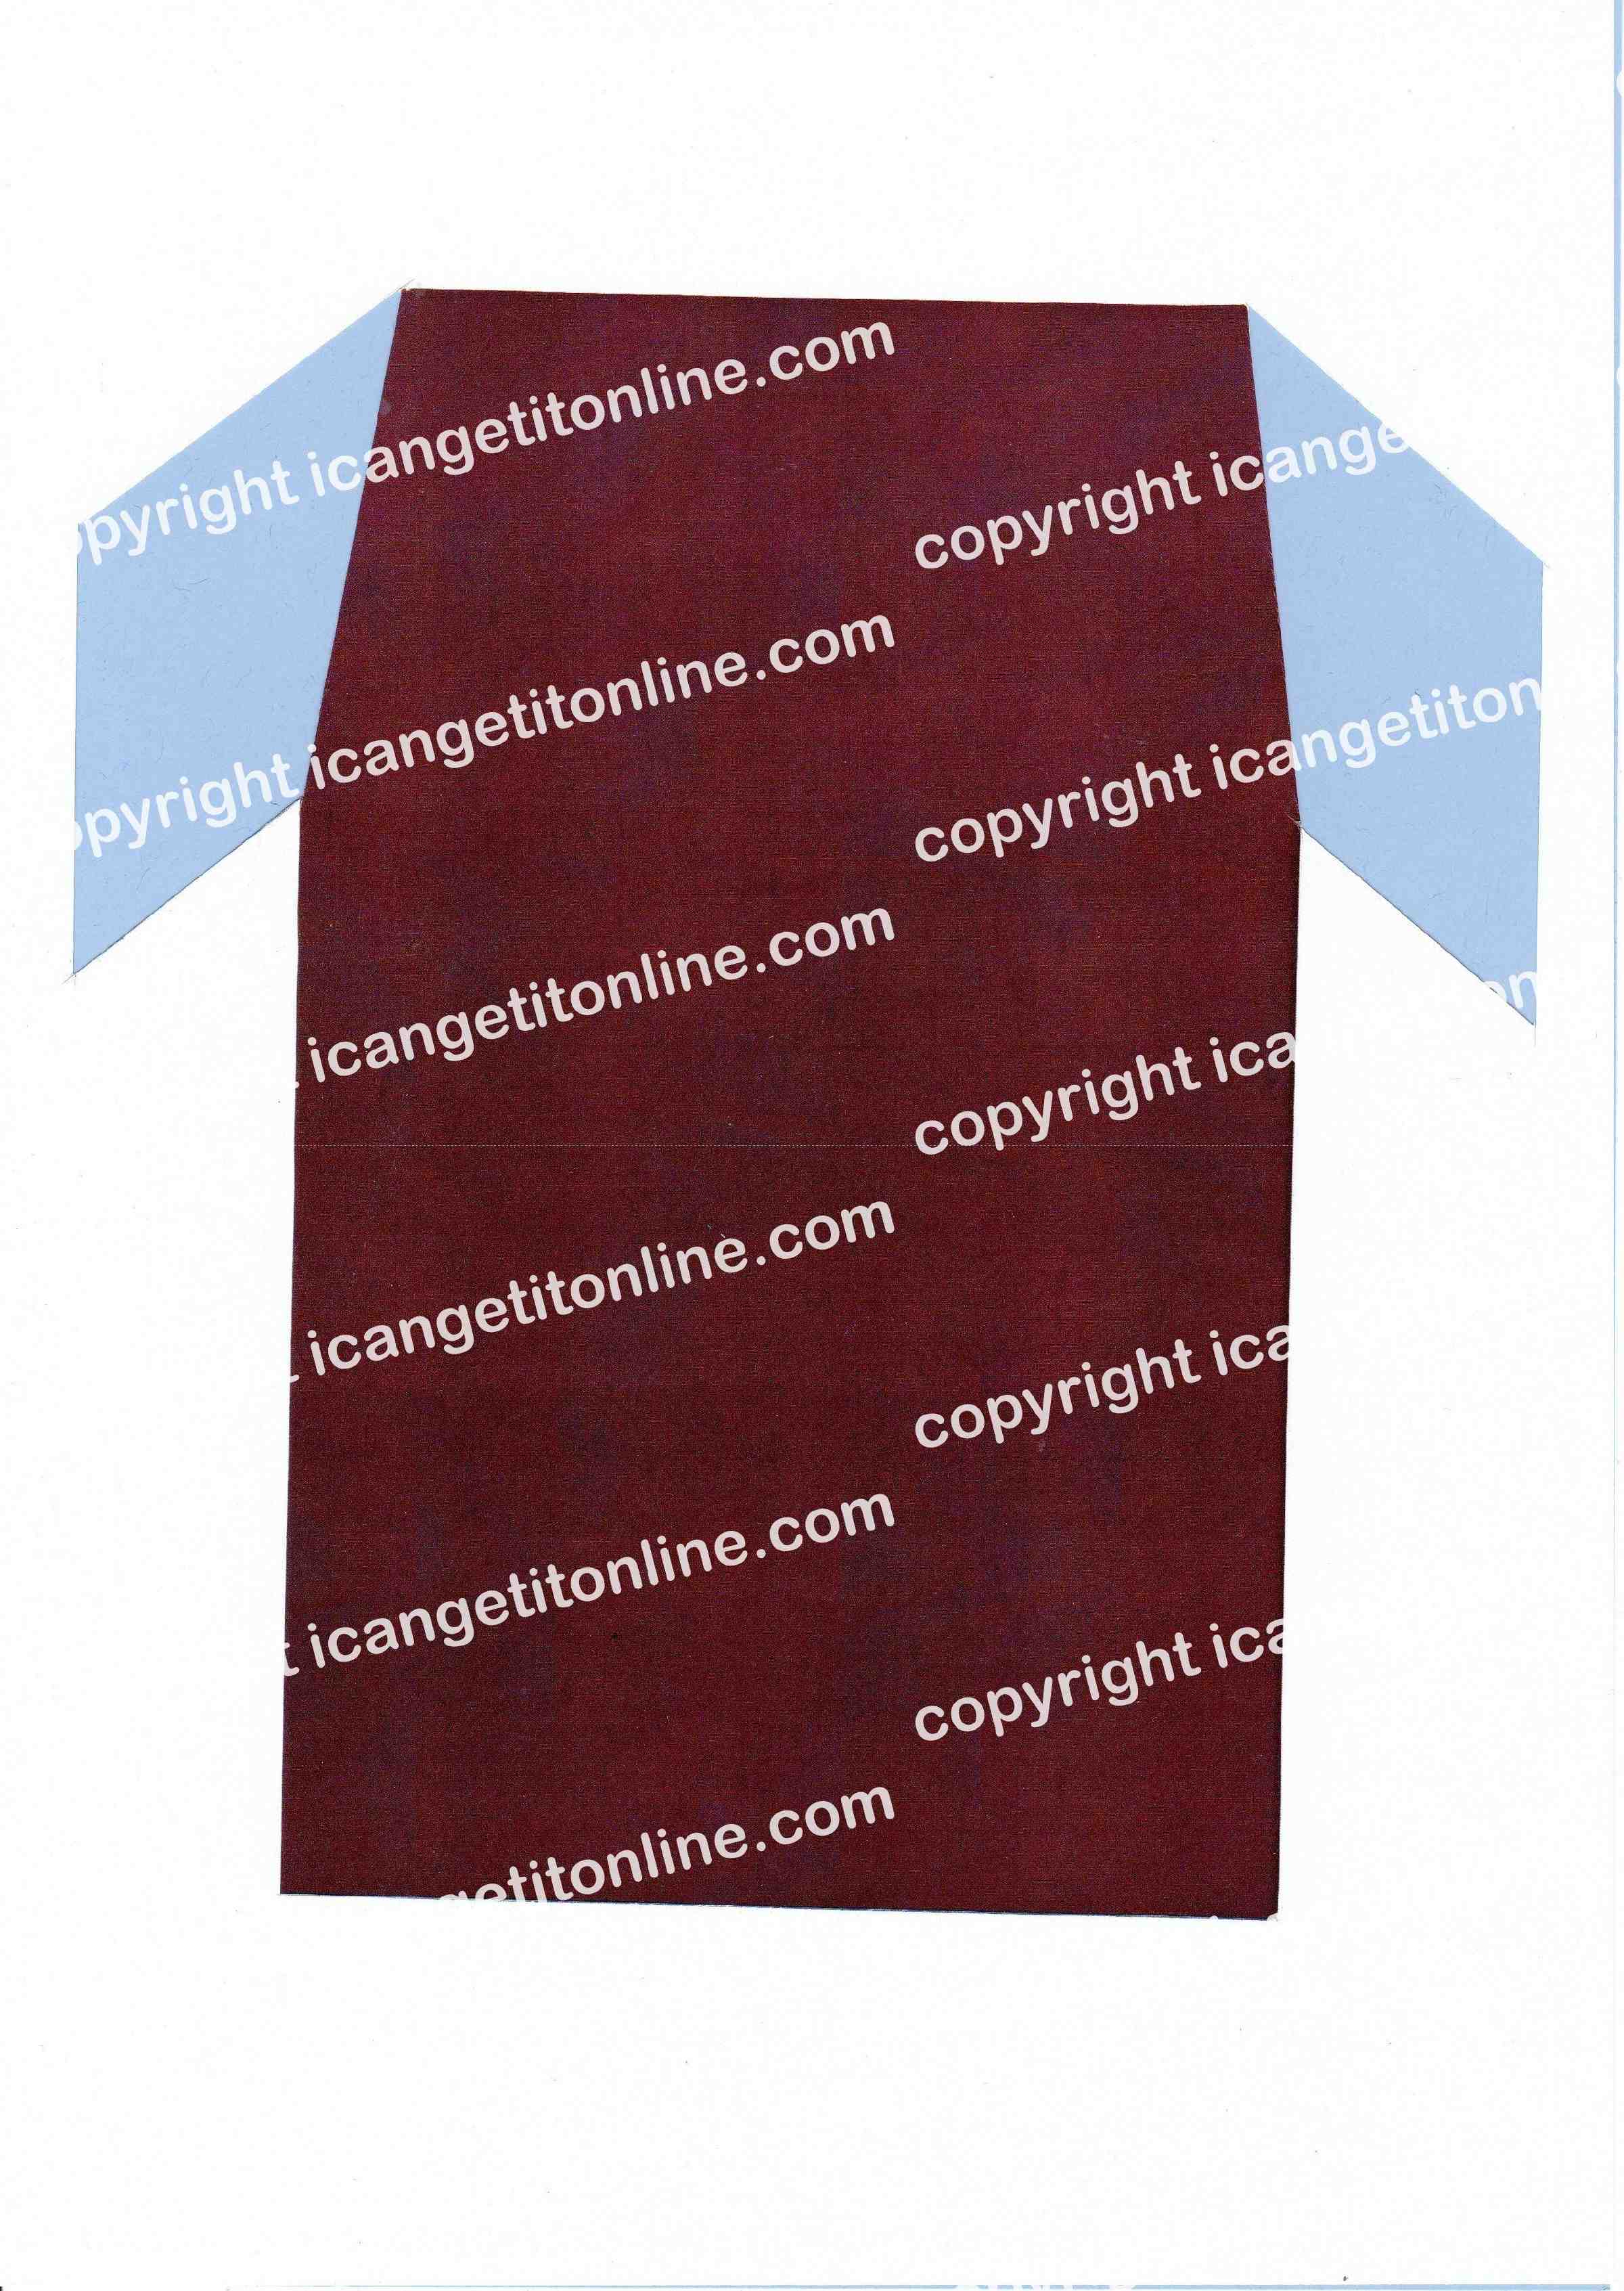 Football Set - Light Blue and Burgundy Strip - <B>WATERMARK NOT ON PURCHASED SET</B> 300 Pages to Download